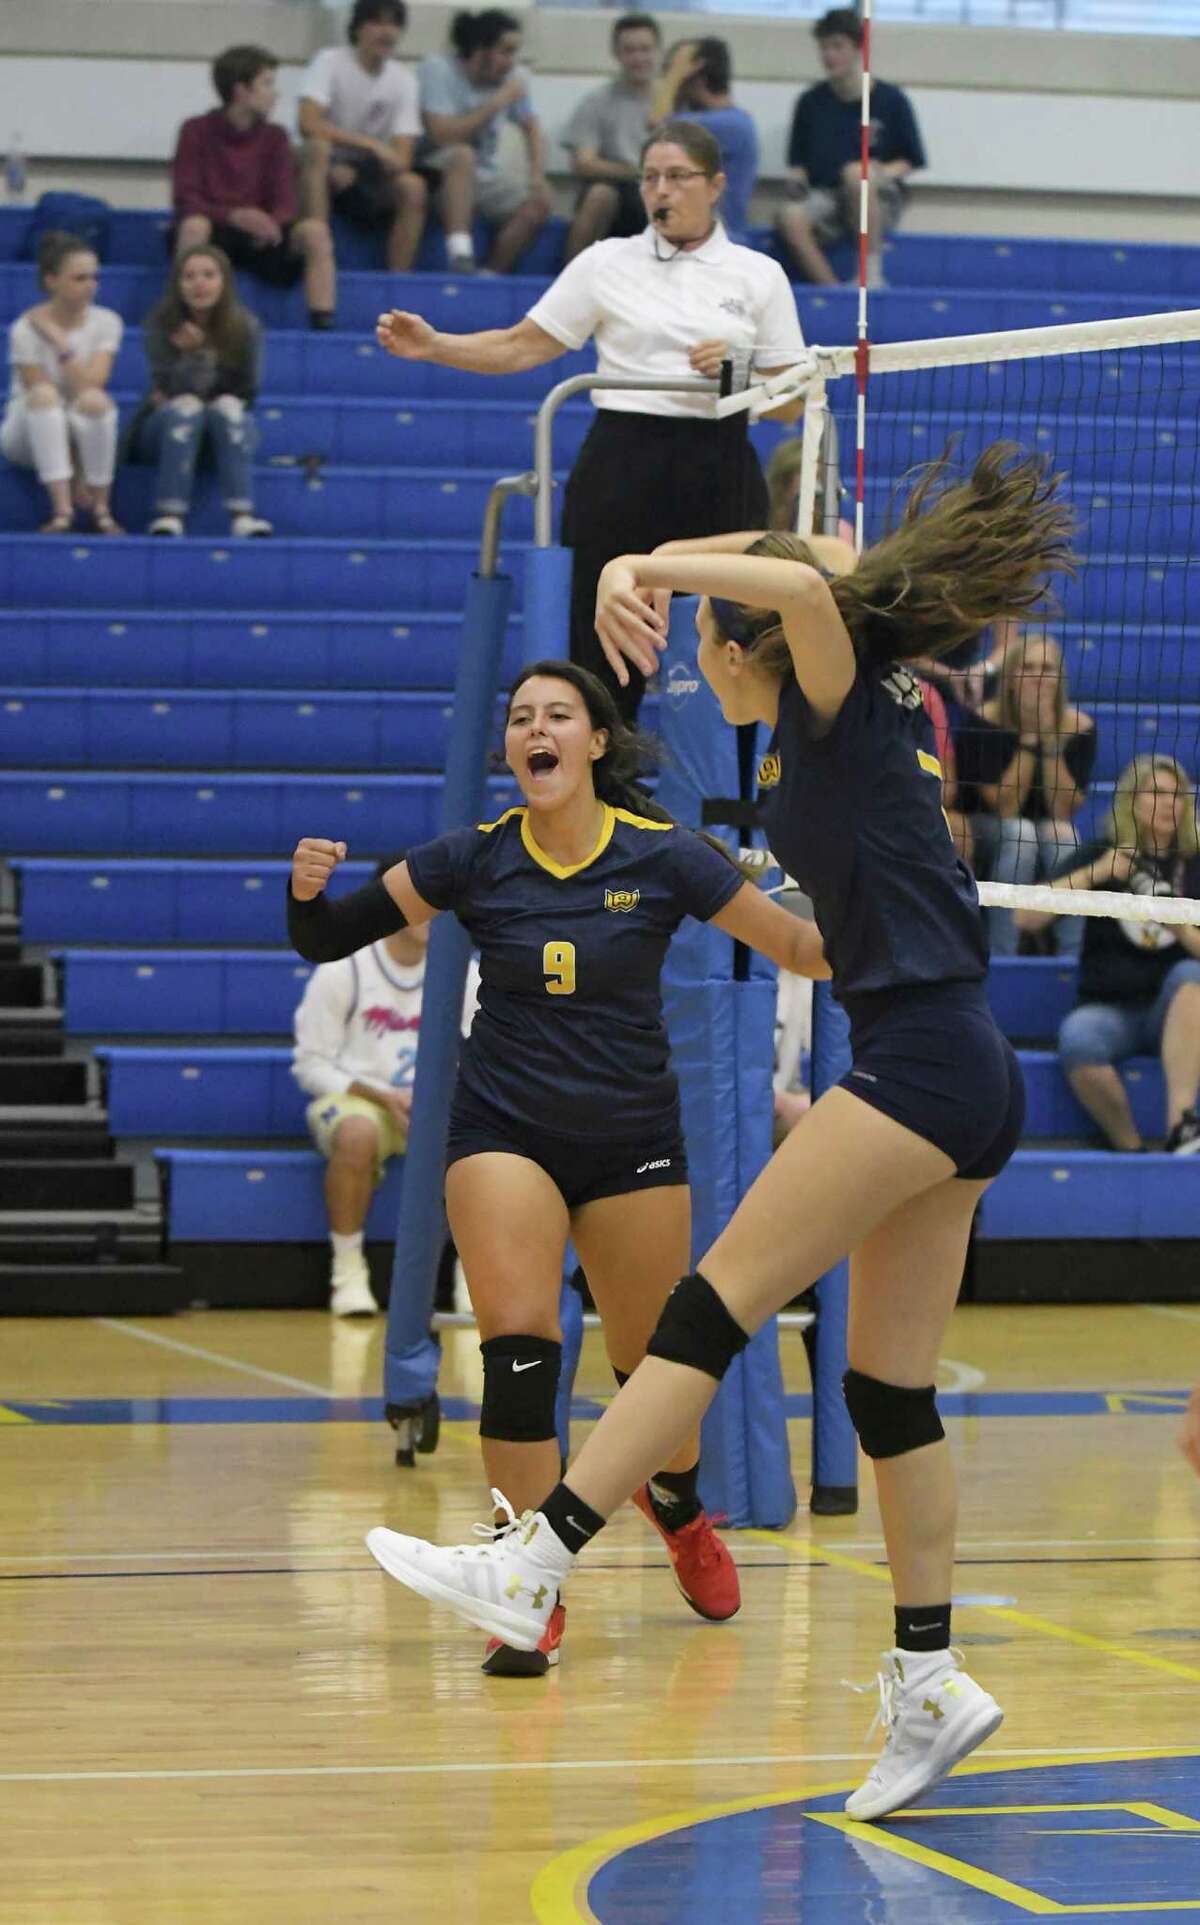 Woodstock Academy’s Paula Hernandez, left, and Marissa Mayhew celebrate during the Woodstock Academy at Newtown High School girls volleyball game, Sept. 17, 2018.